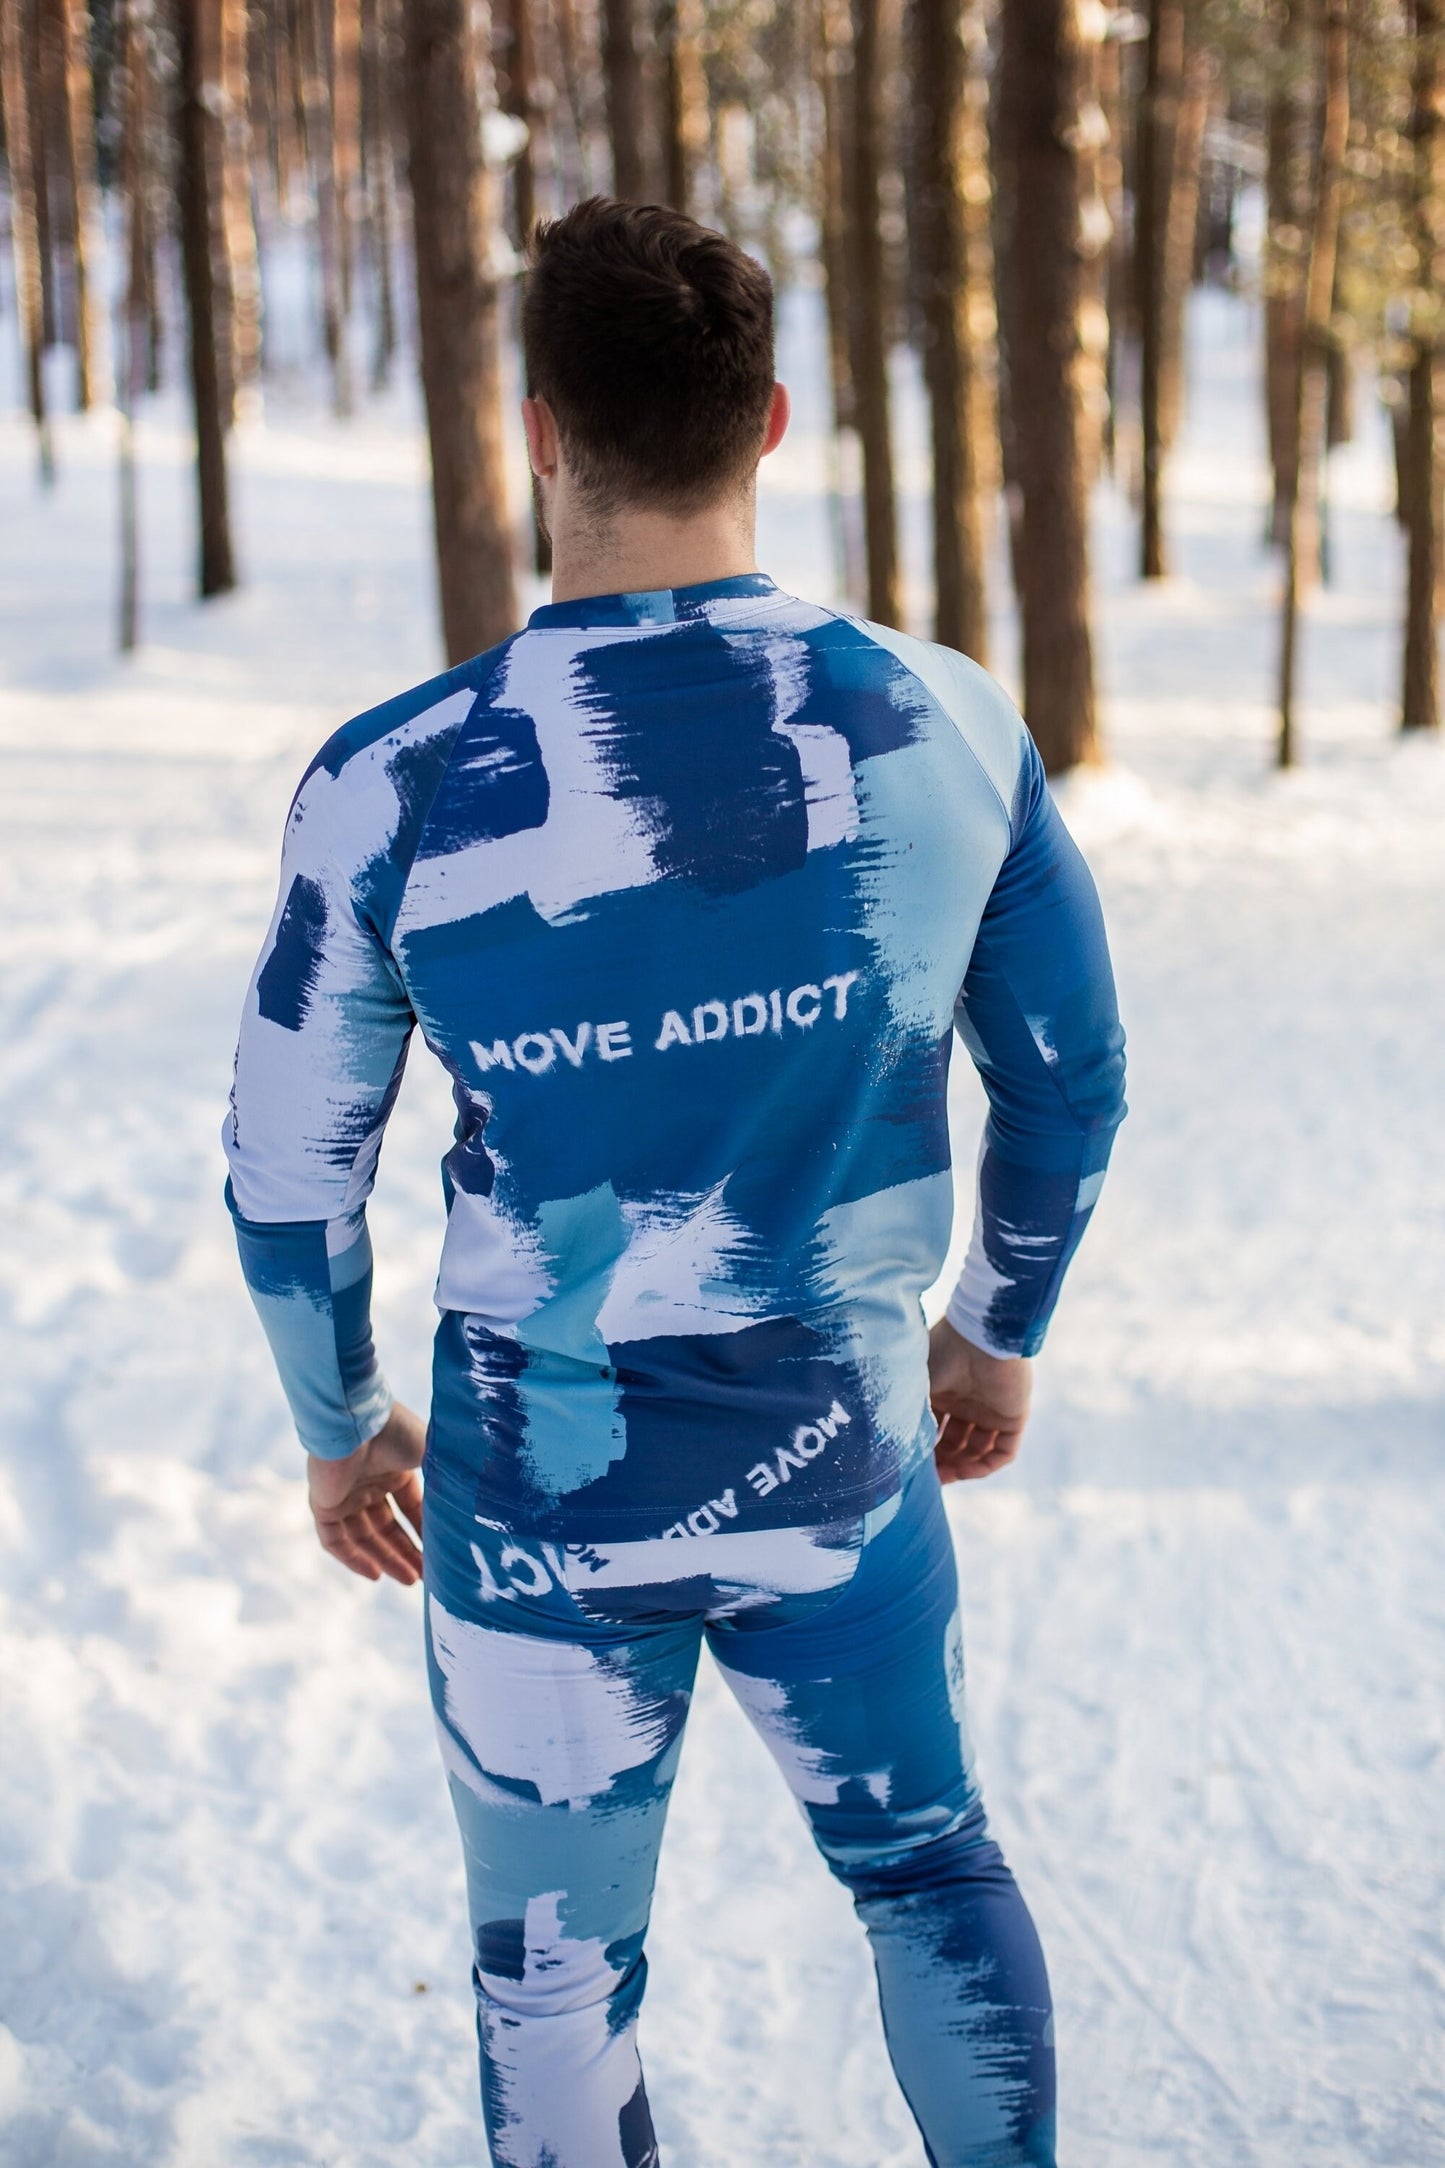 SET: Men's Gray Winter Thermal underwear, Montain's Clothes, Snowboard style, Man Leggings and Top, Men's Mountain's clothes, Man Leggings